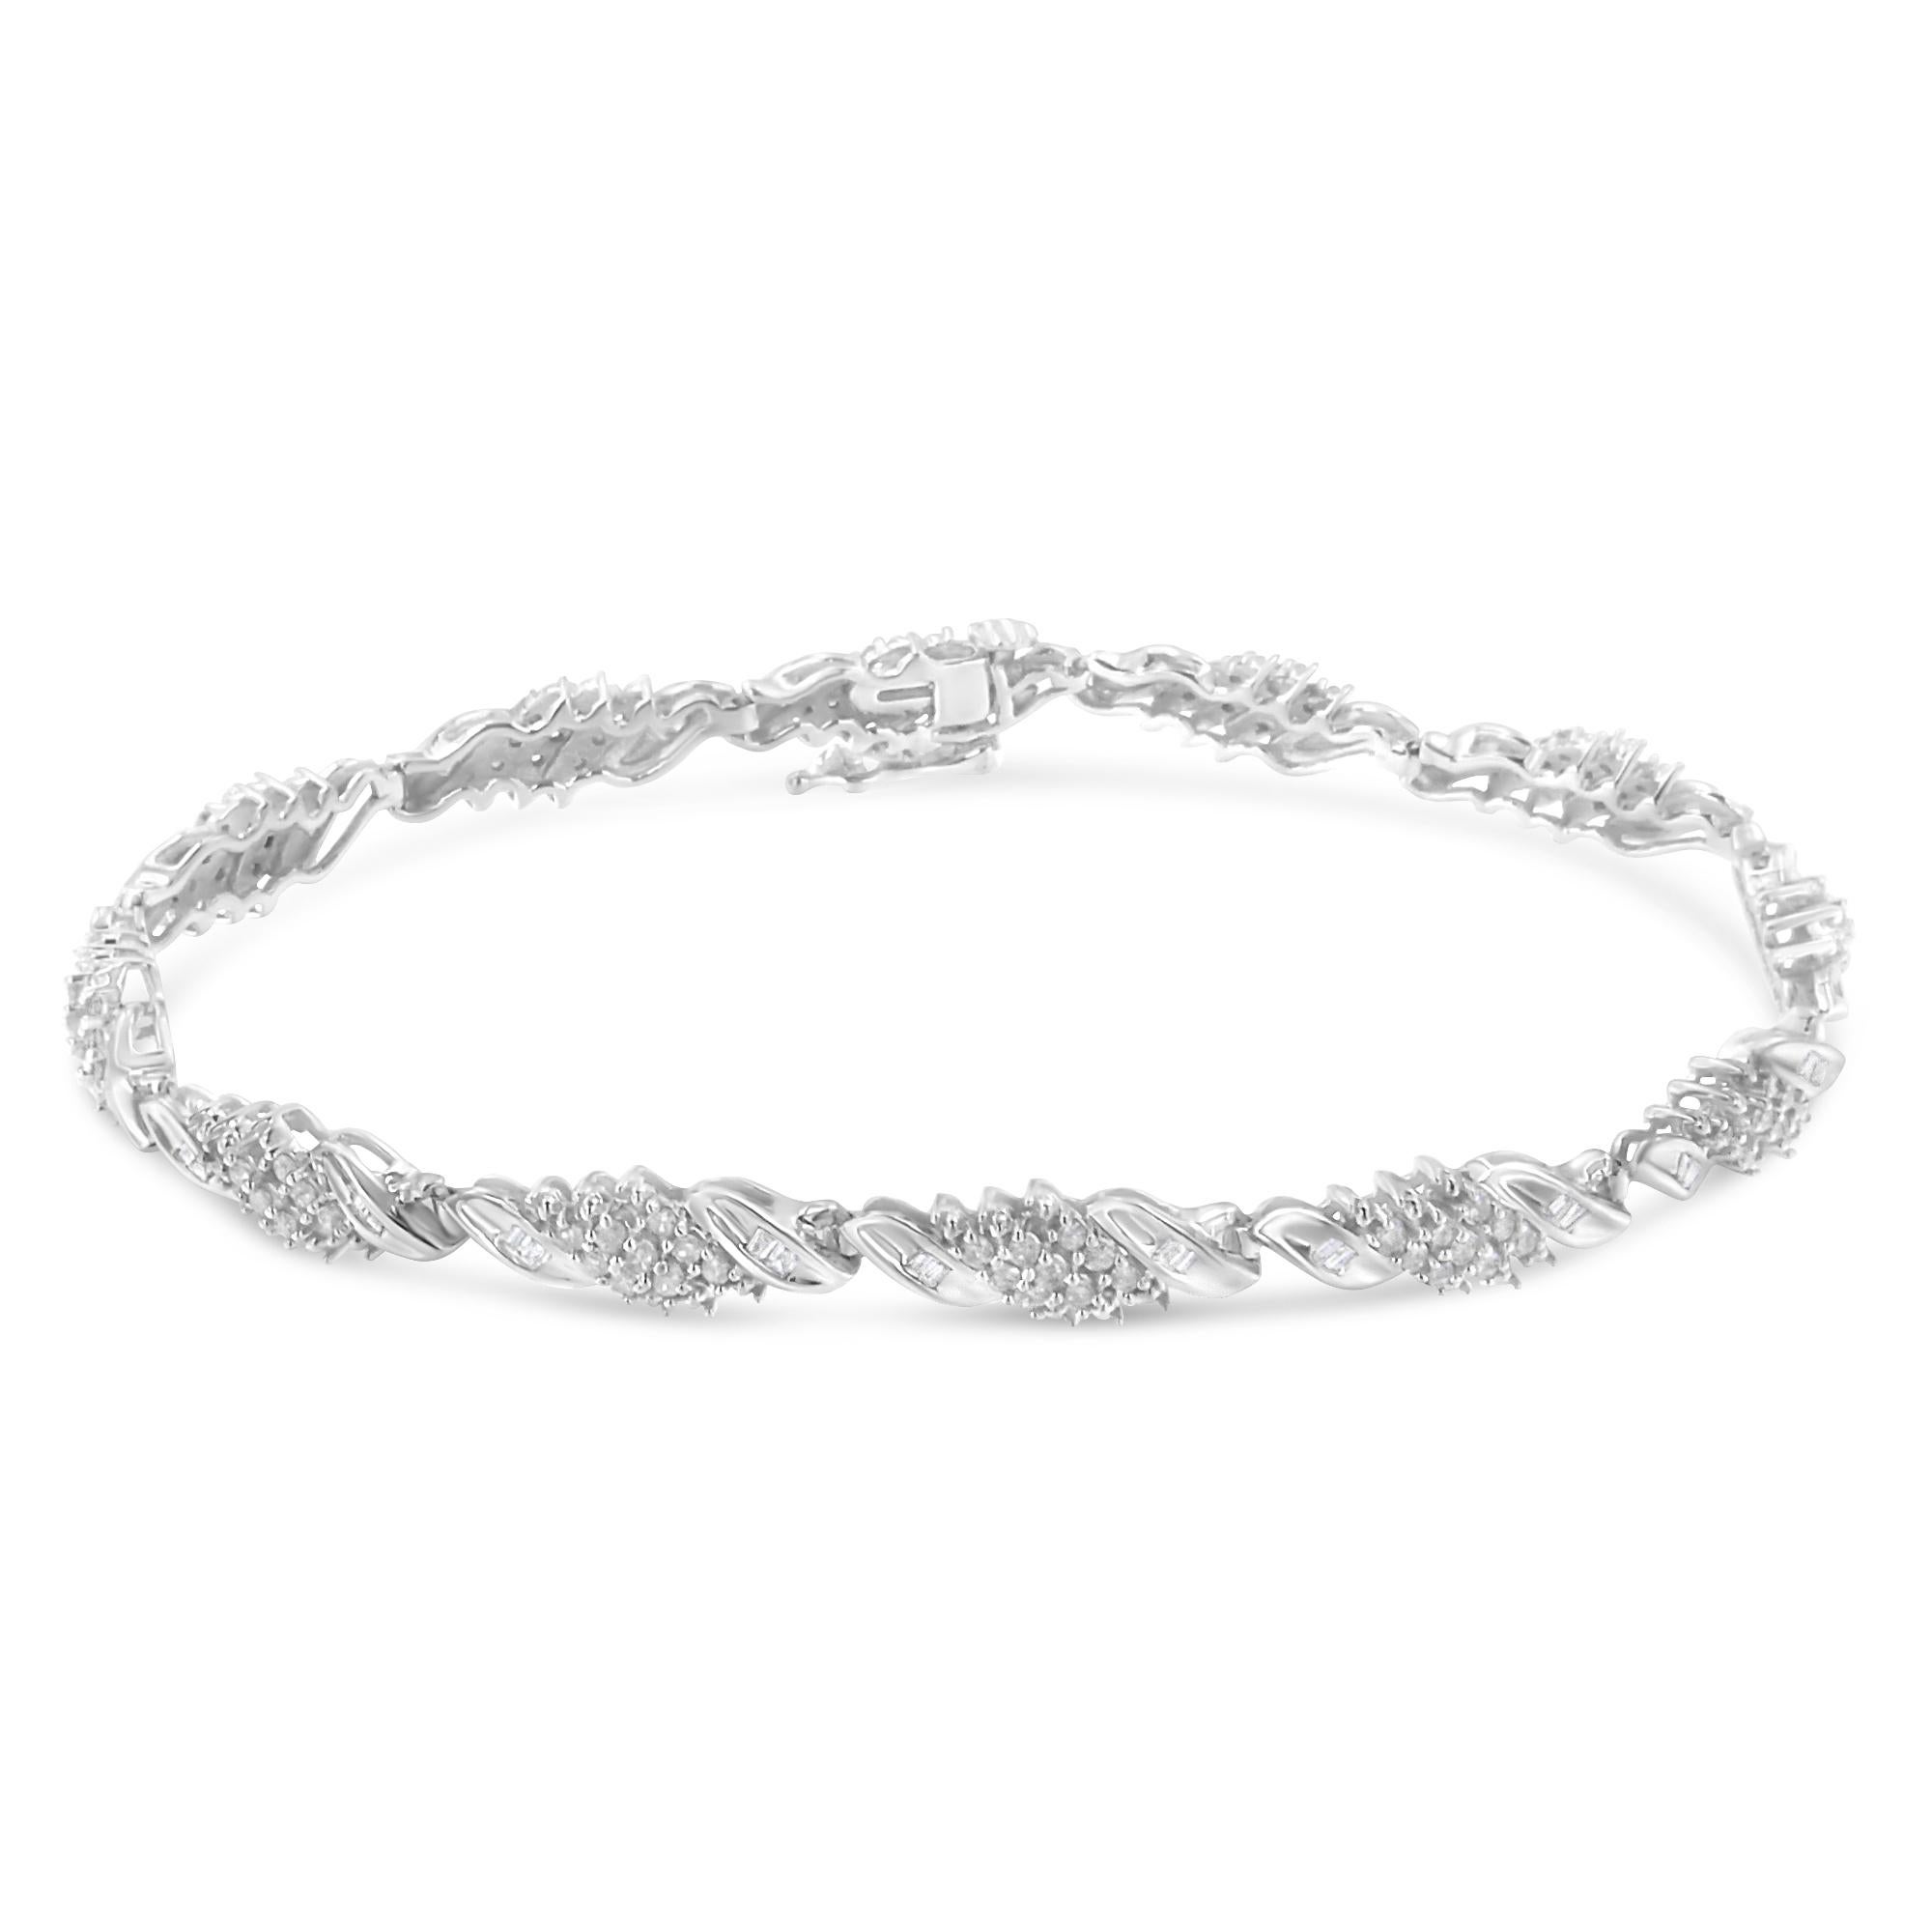 Add some sparkle to your wrist with this fabulous link bracelet. Crafted in cool sterling silver, this bracelet showcases 1 1/2 carat TDW of diamonds. Each link is created by three diagonal rows of round diamonds and flanked by two silver ribbons